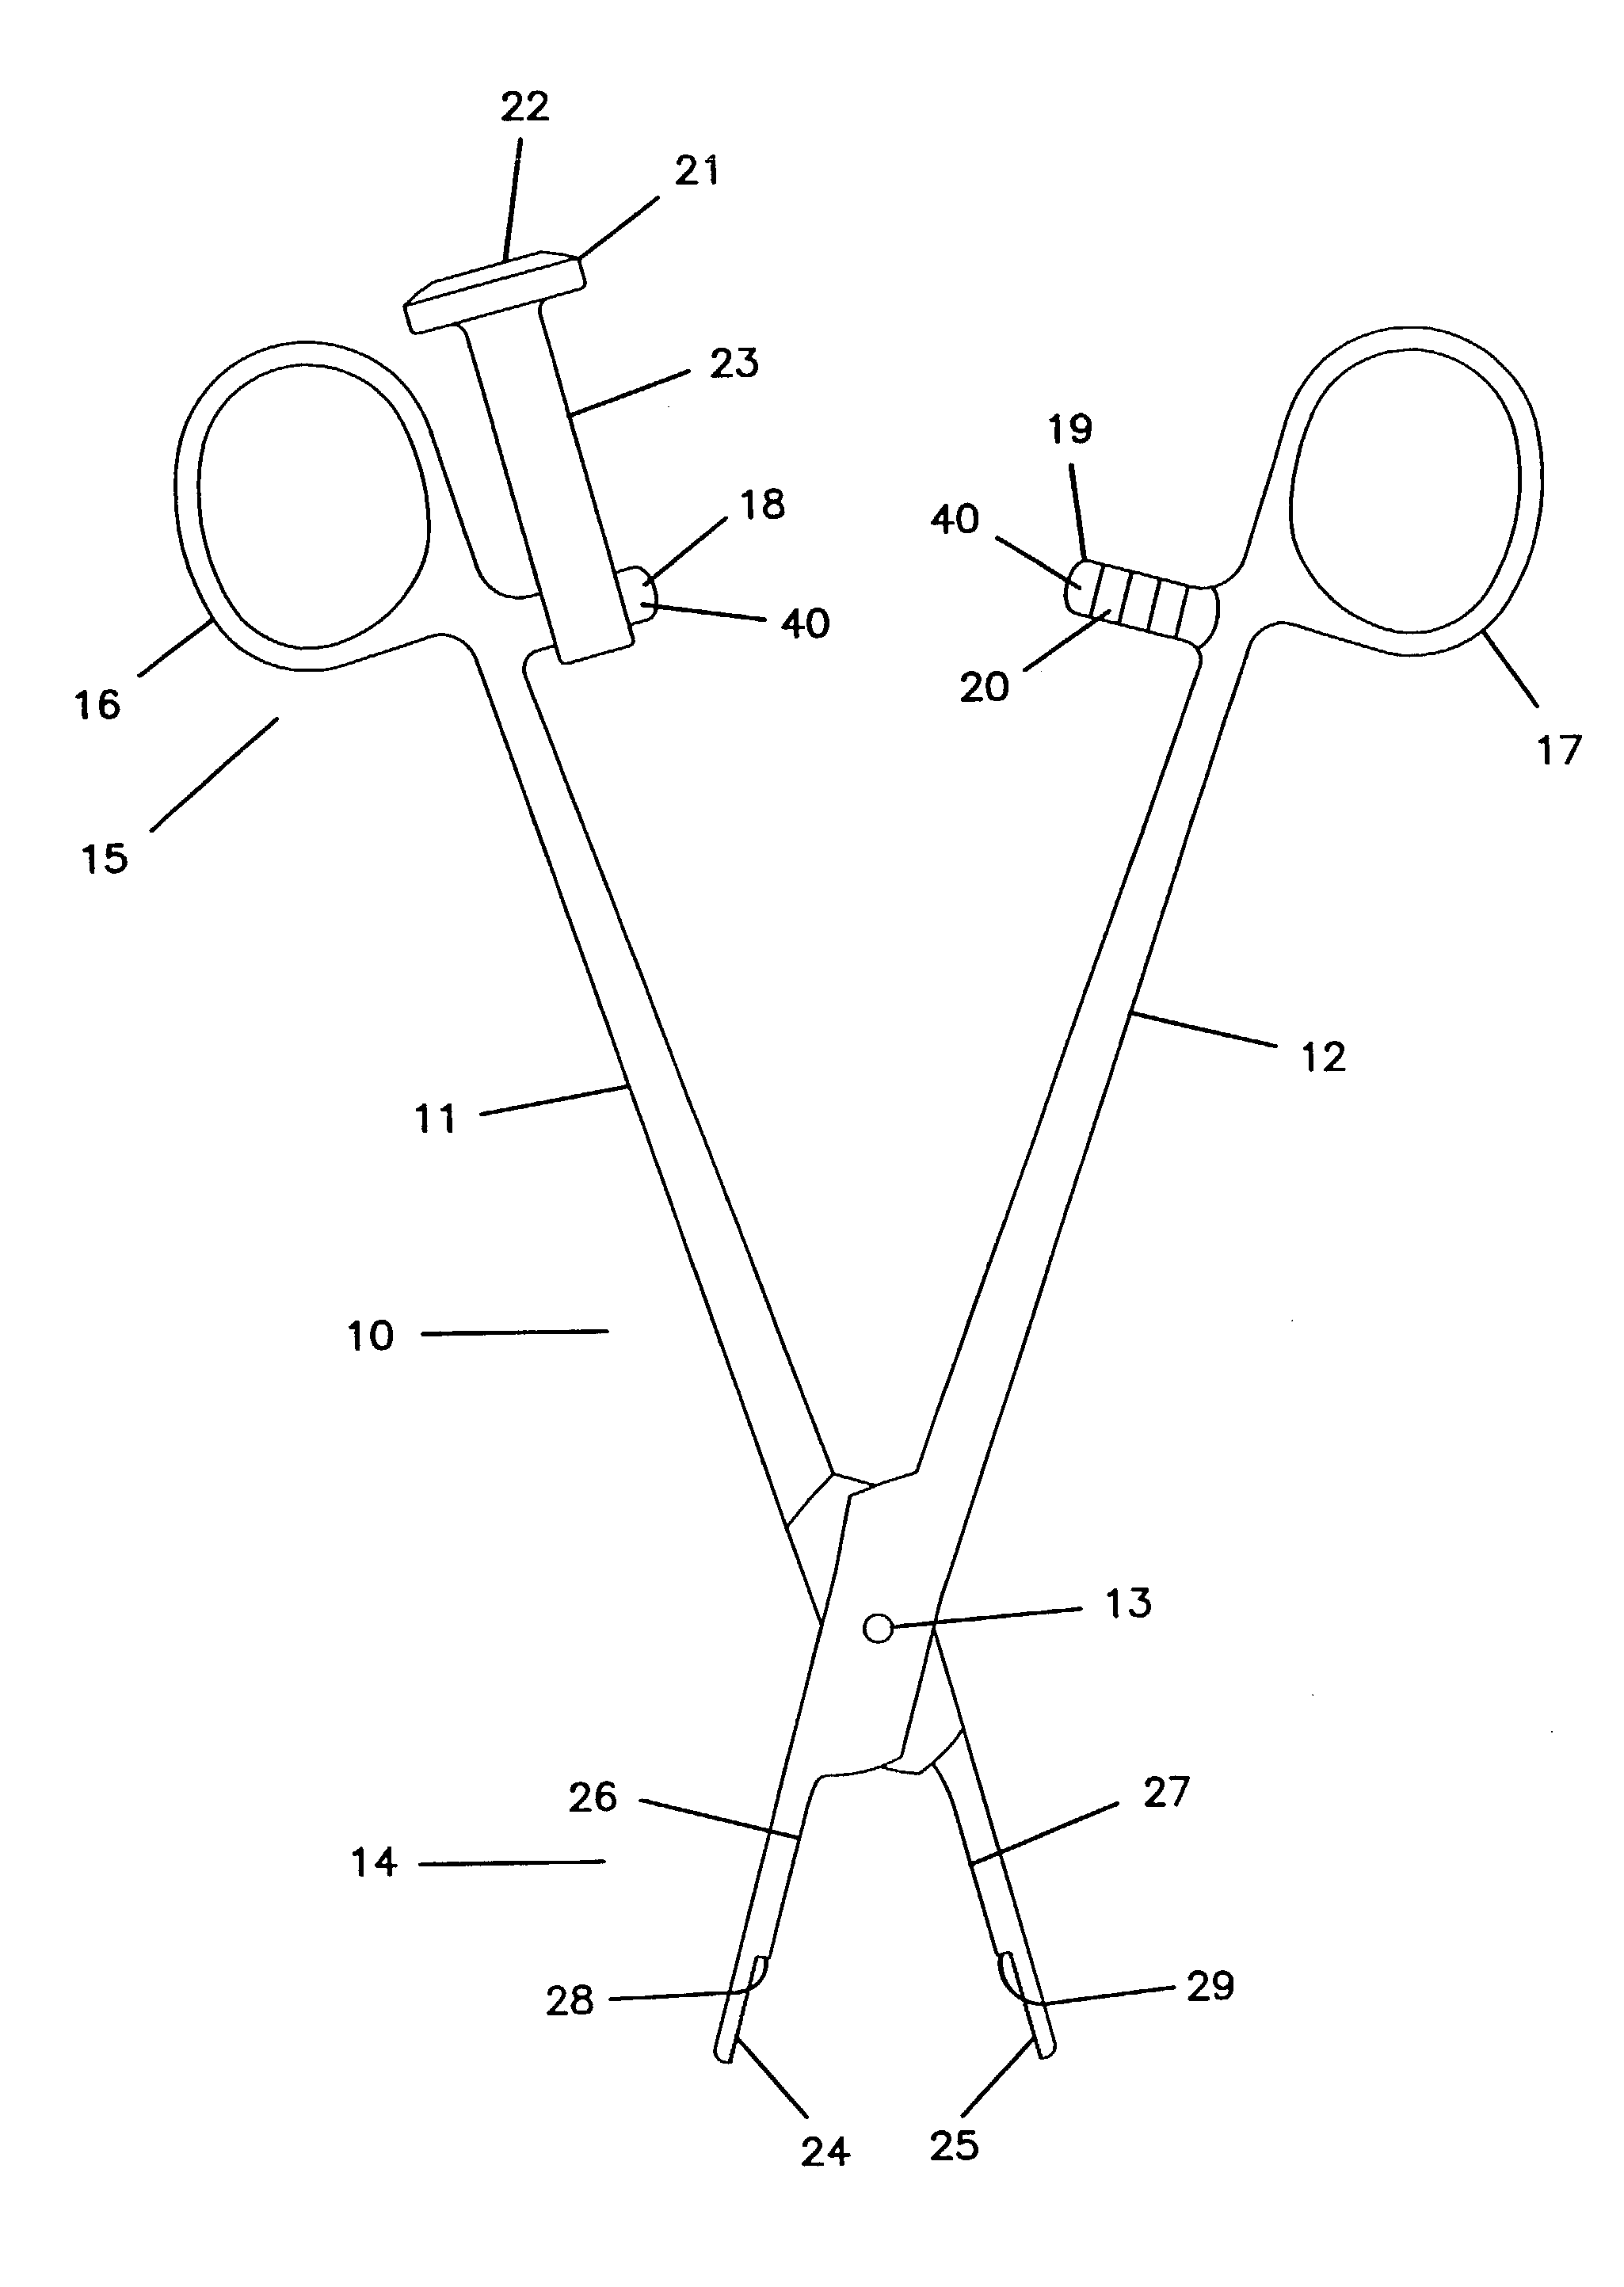 Surgical implant instrument and method